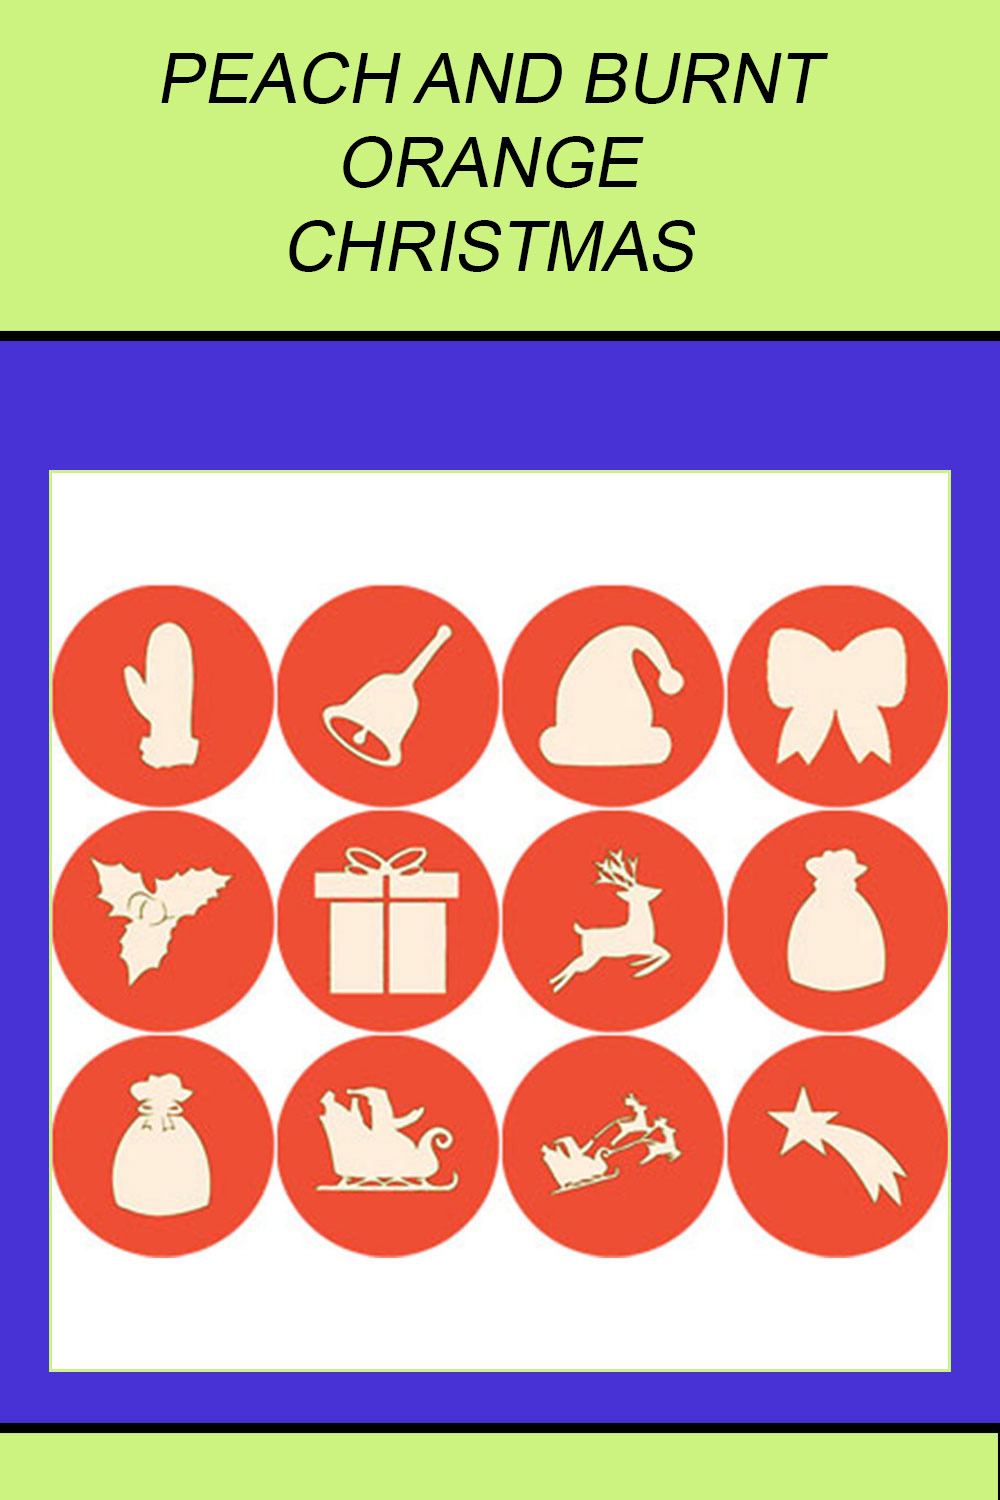 PEACH AND BURNT ORANGE CHRISTMAS ROUND ICONS pinterest preview image.